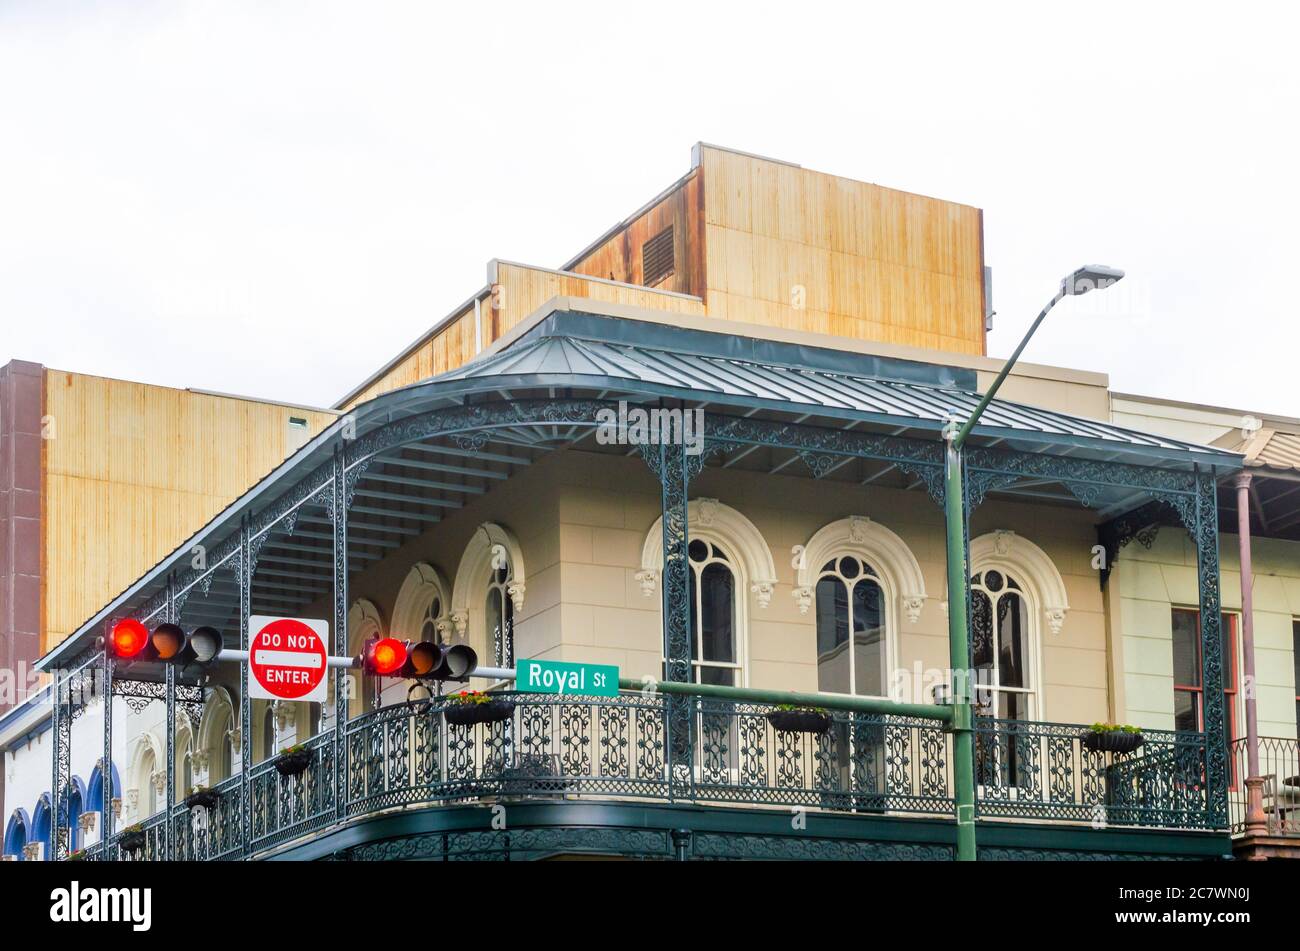 Wrought iron adds a decorative element to a building on Royal Street, July 3, 2020, in Mobile, Alabama. Stock Photo